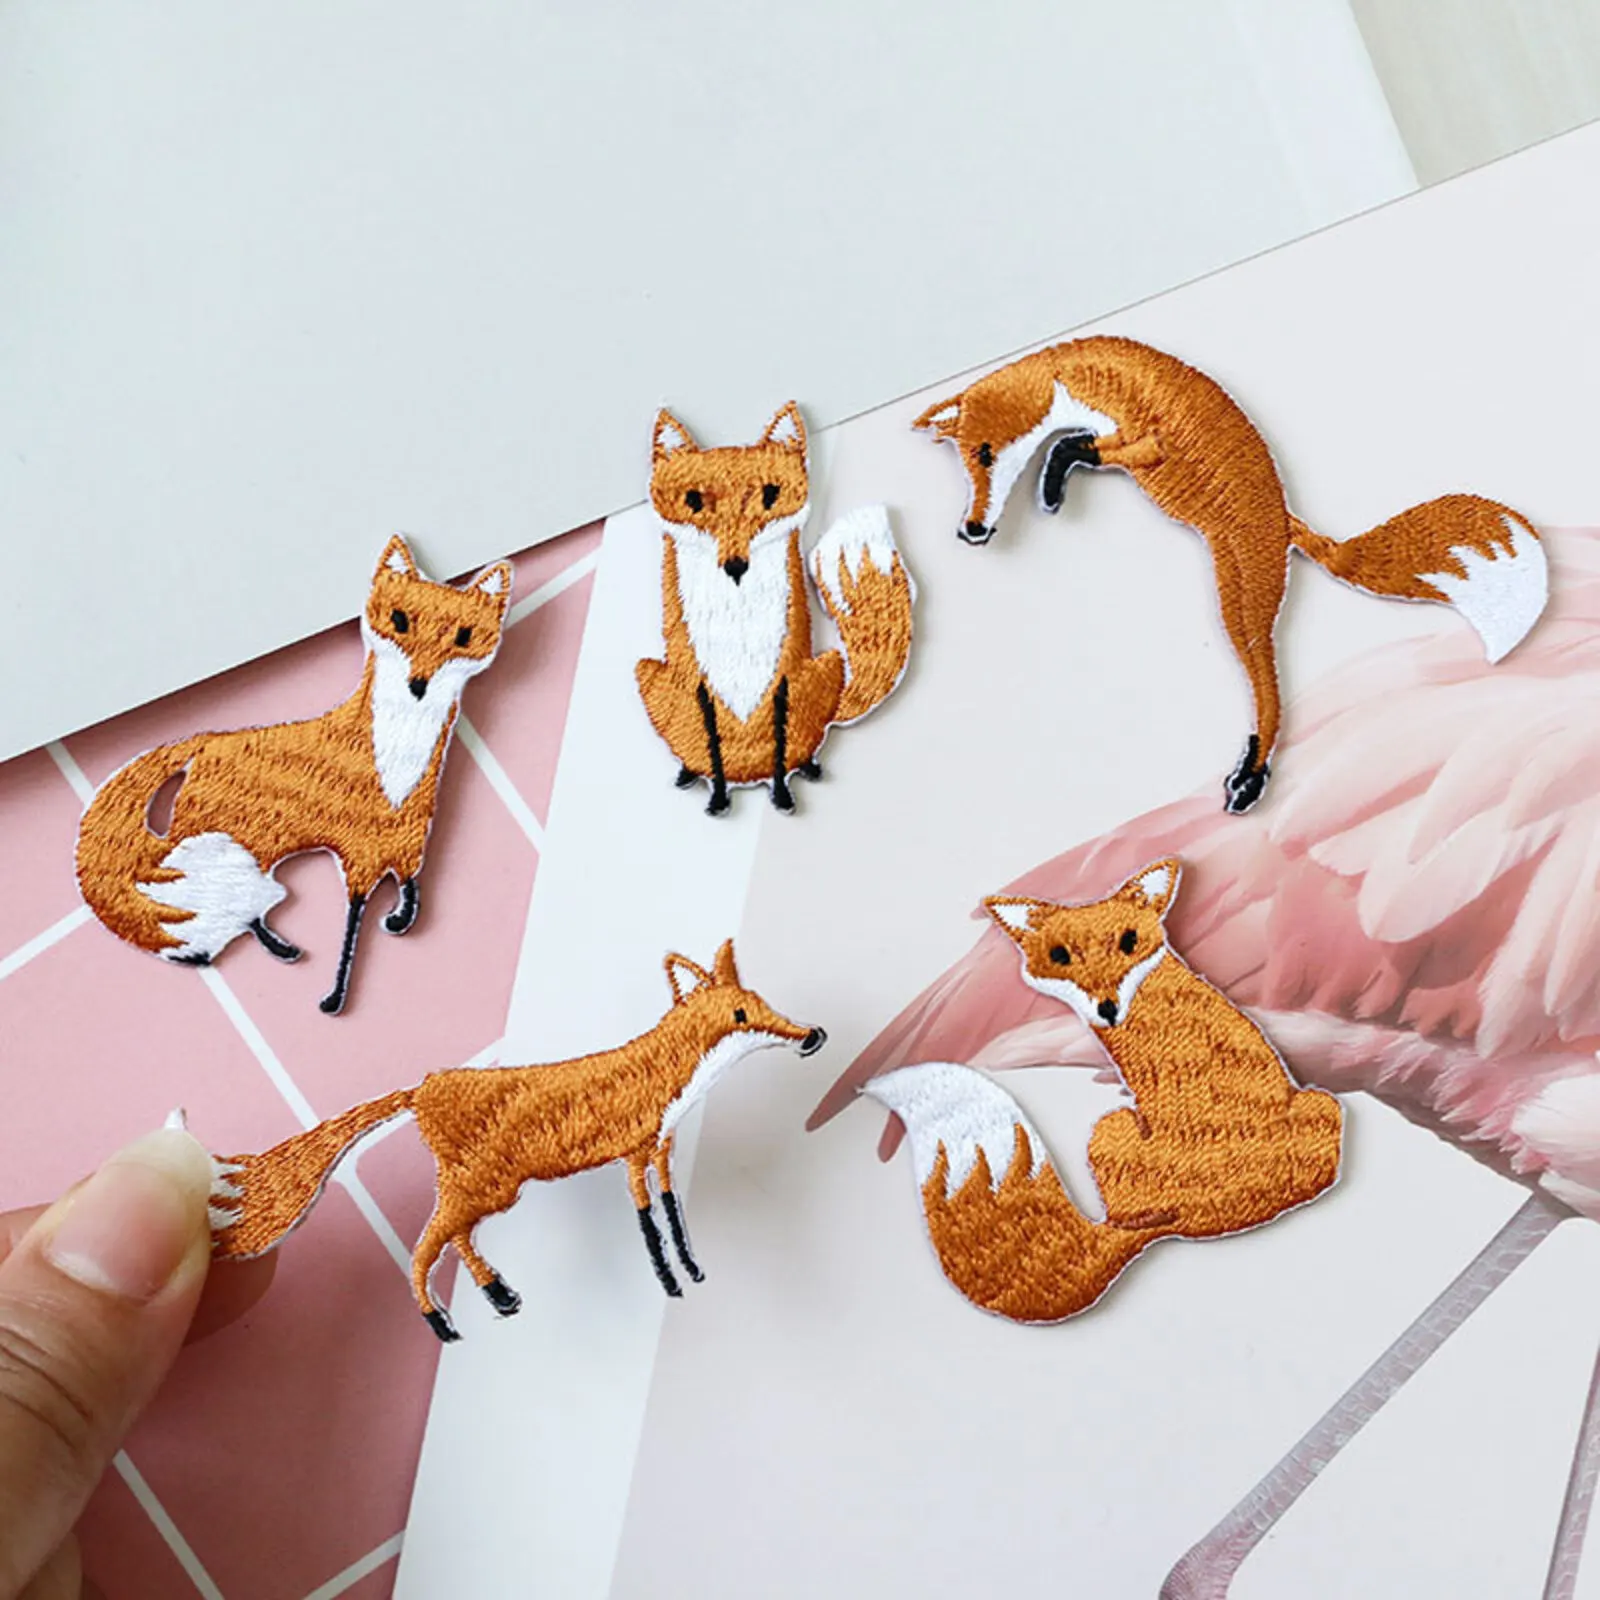 

Patches on Clothes Iron on Accessories Clothing Thermoadhesive Fusible Patch Applique Embroidered Fox Anime Dress Heat-Adhesive